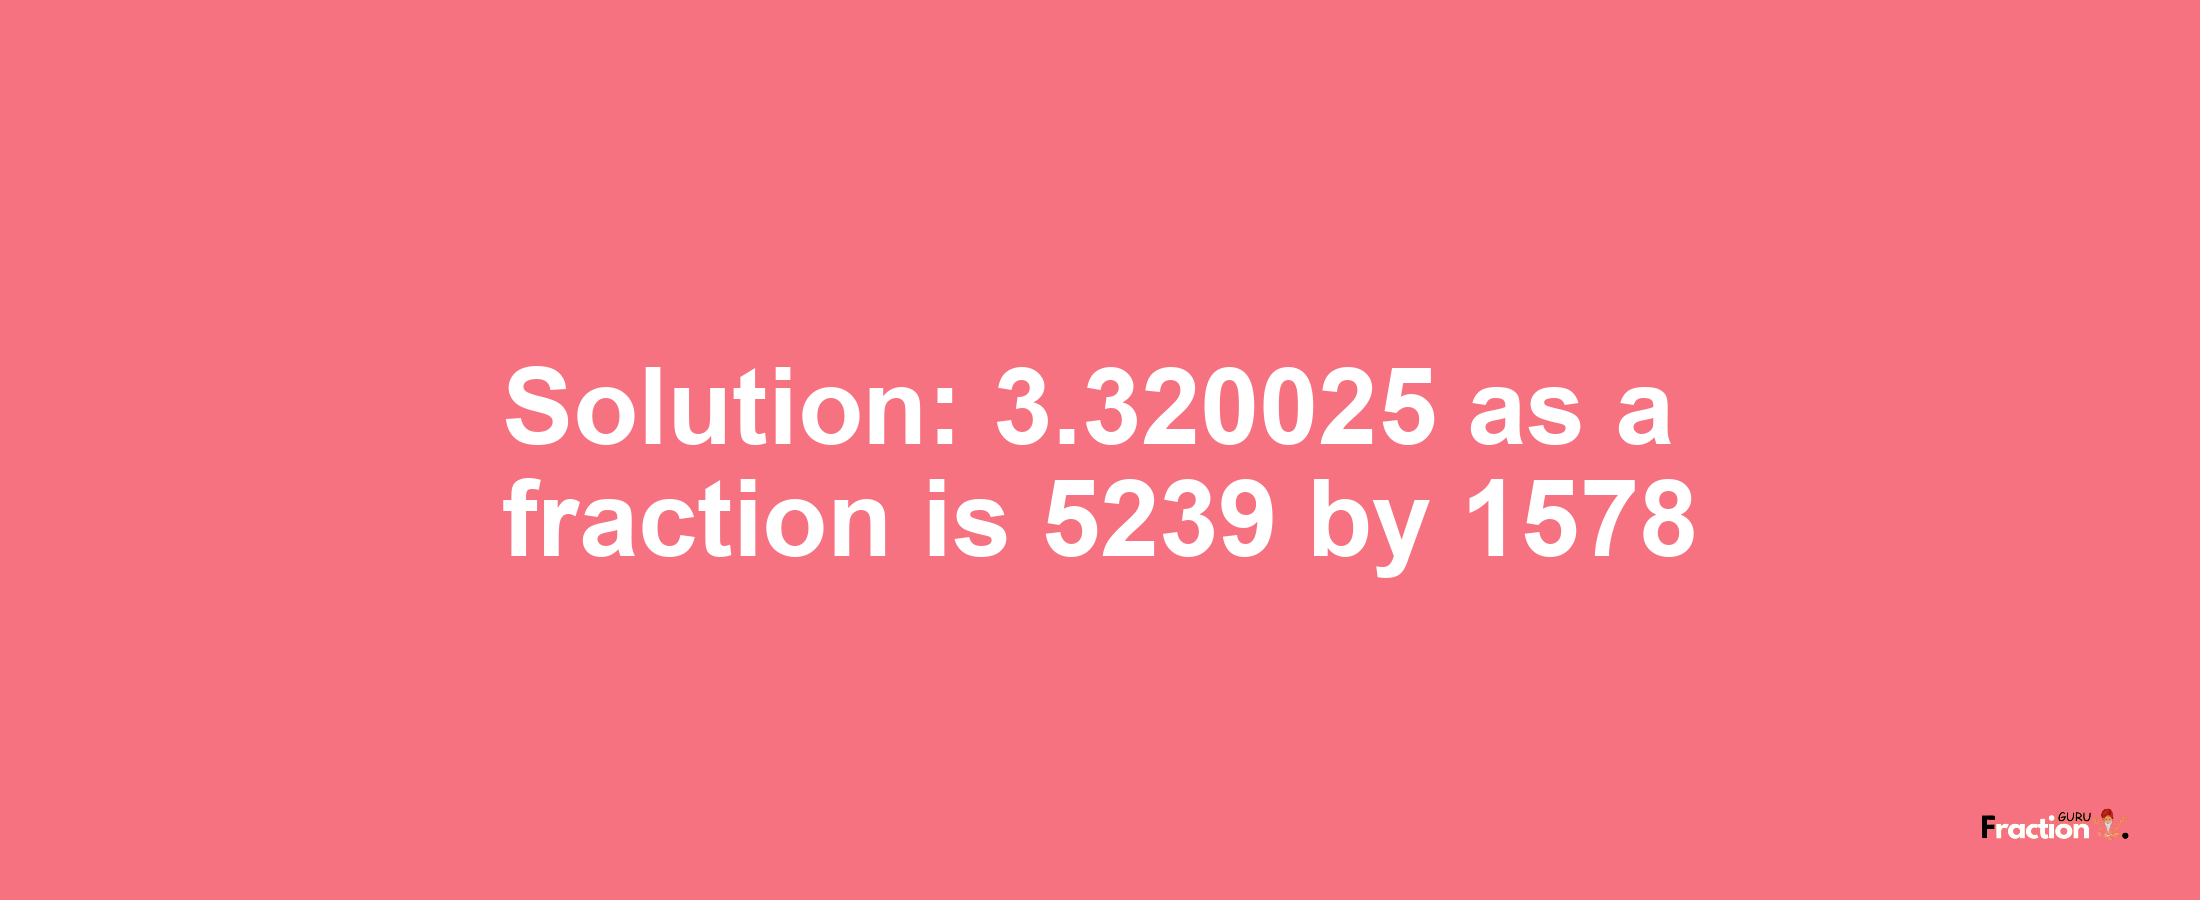 Solution:3.320025 as a fraction is 5239/1578